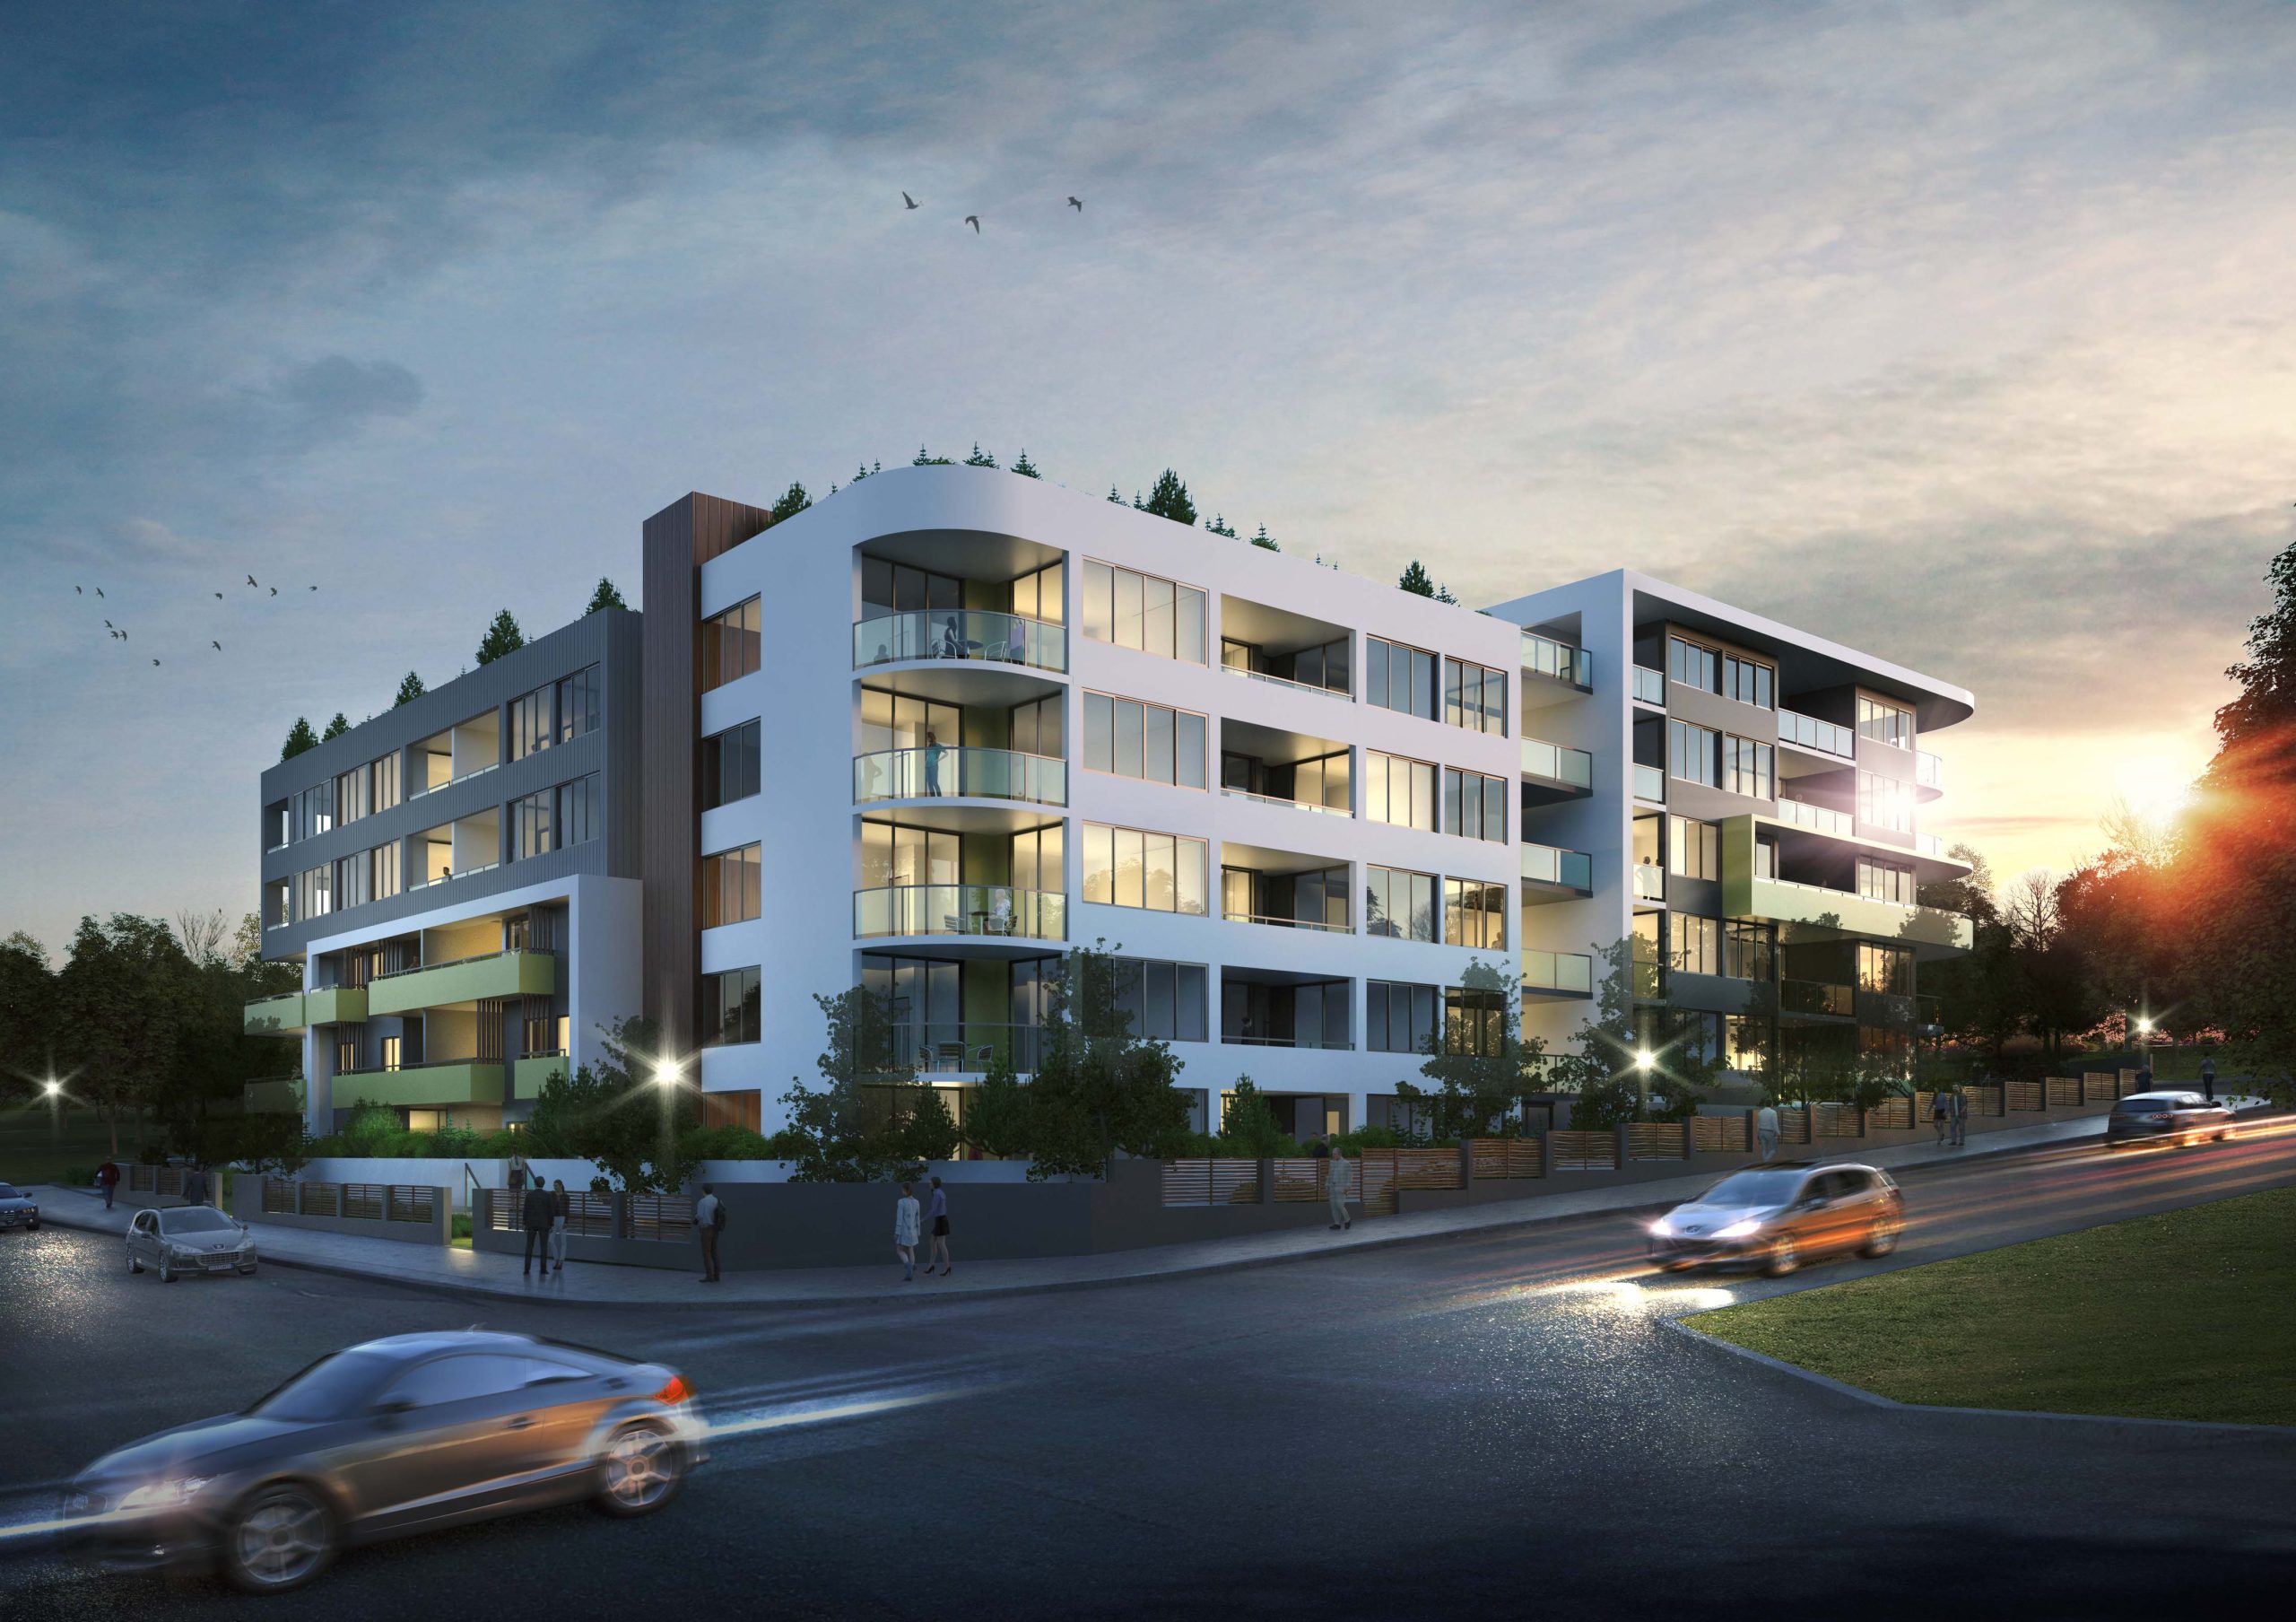 Ophora at Tallawong in the first development at Blacktown Council to receive Latent Defects Insurance